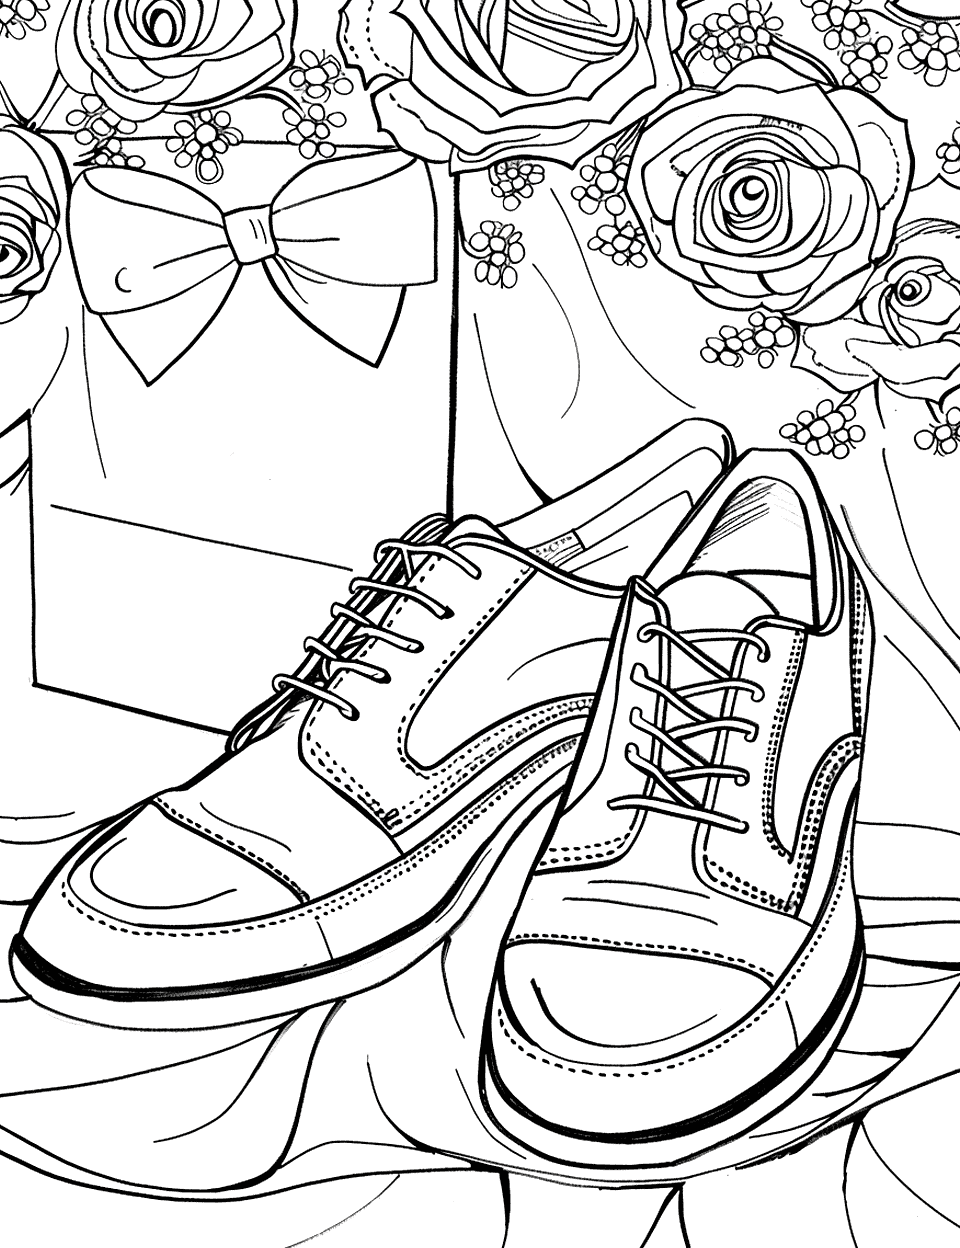 Fancy Dress Shoes Shoe Coloring Page - A pair of polished dress shoes ready to be rocked at a wedding.